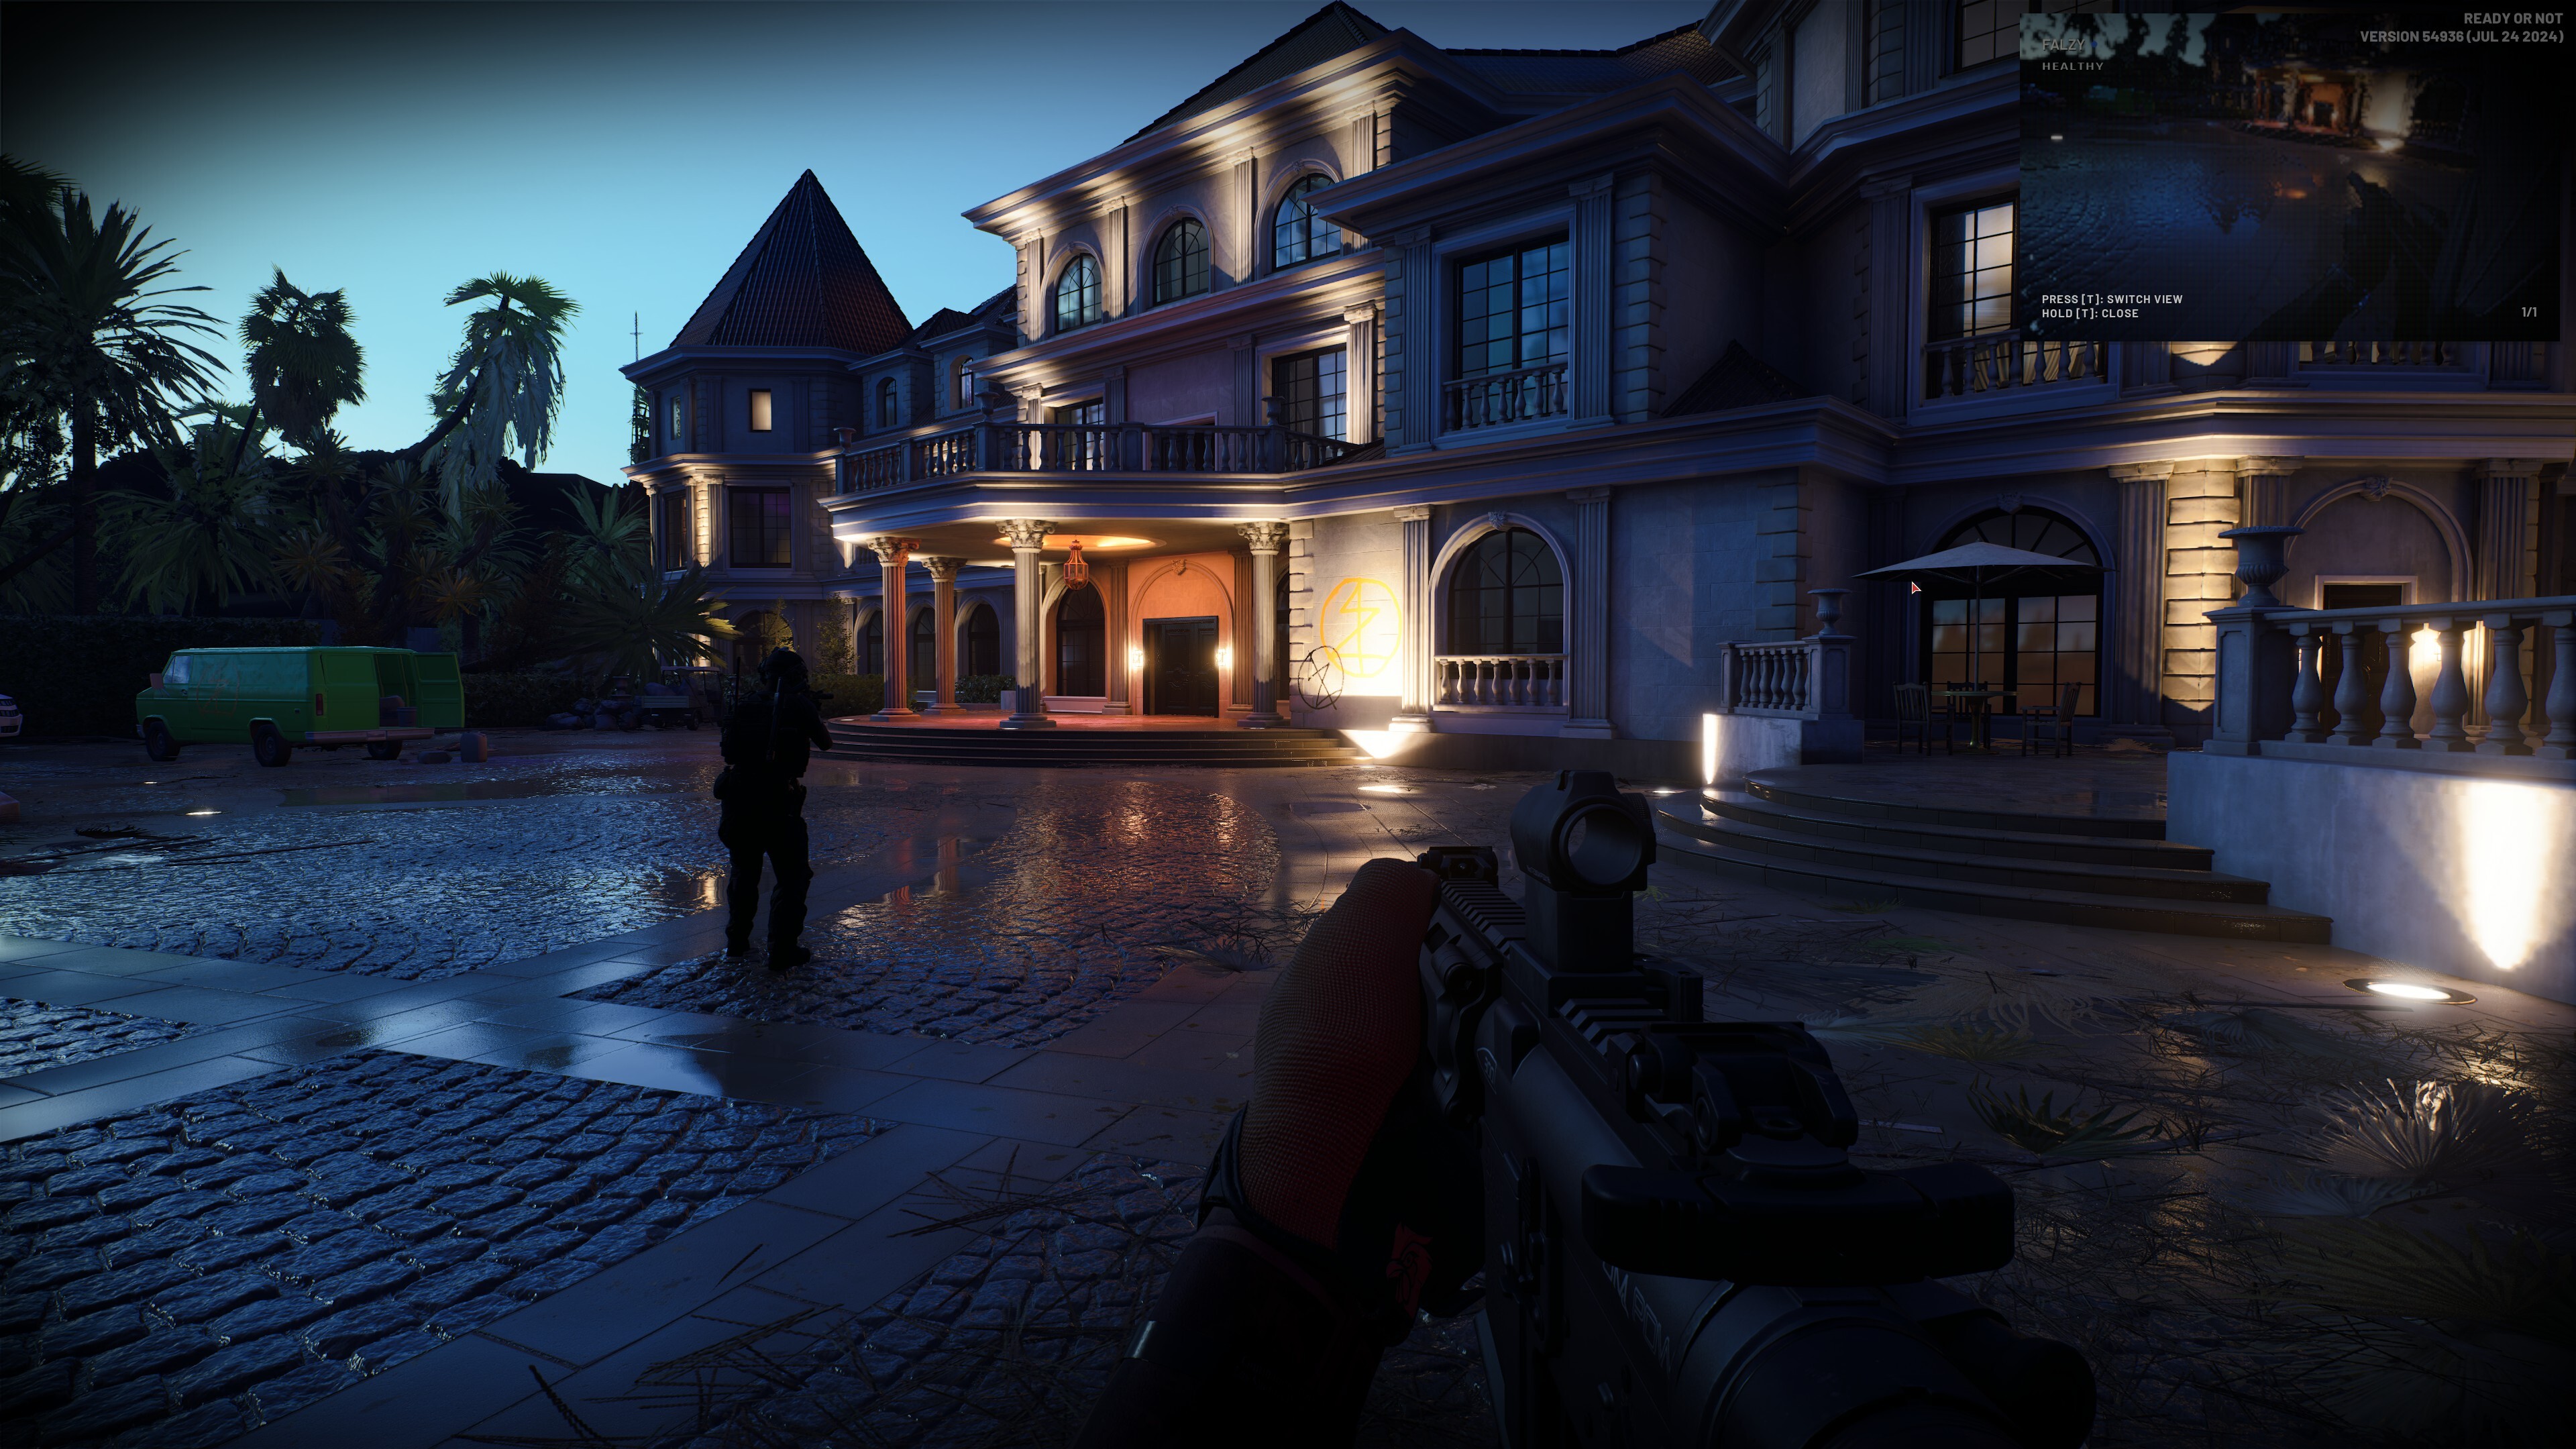 Figures with guns approach a house at night.